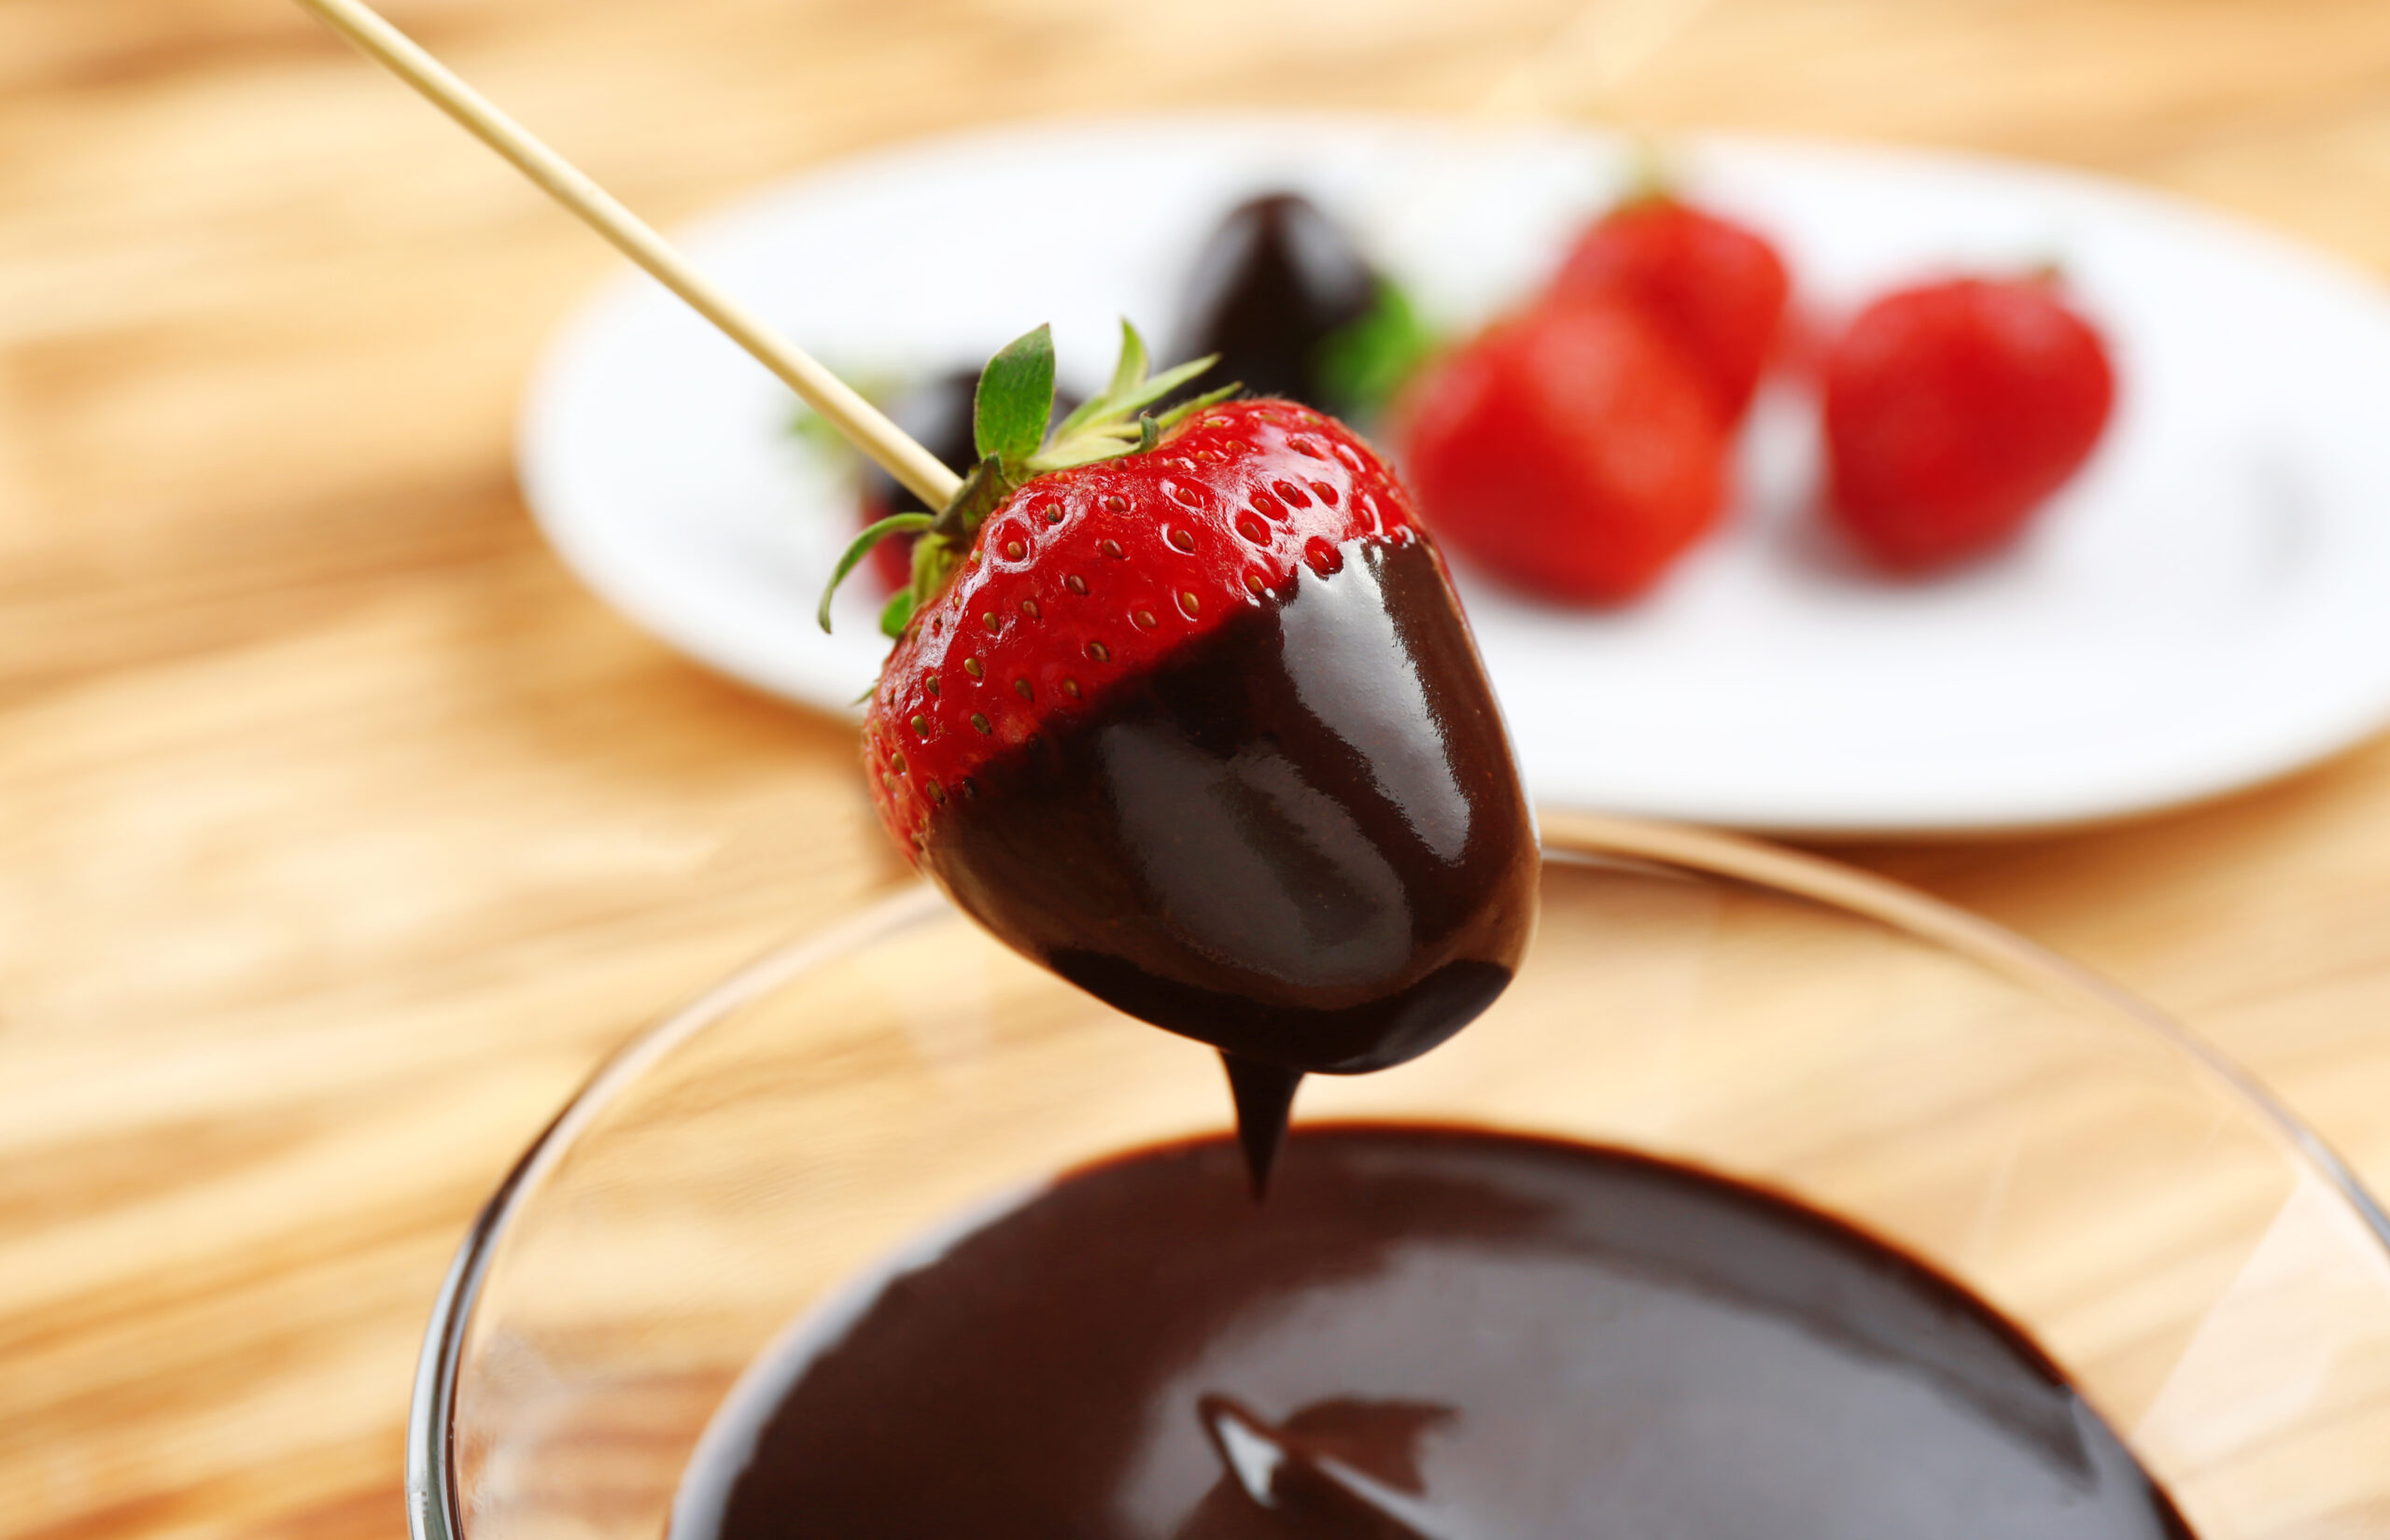 Image of a strawberry dipped in chcolate fondue